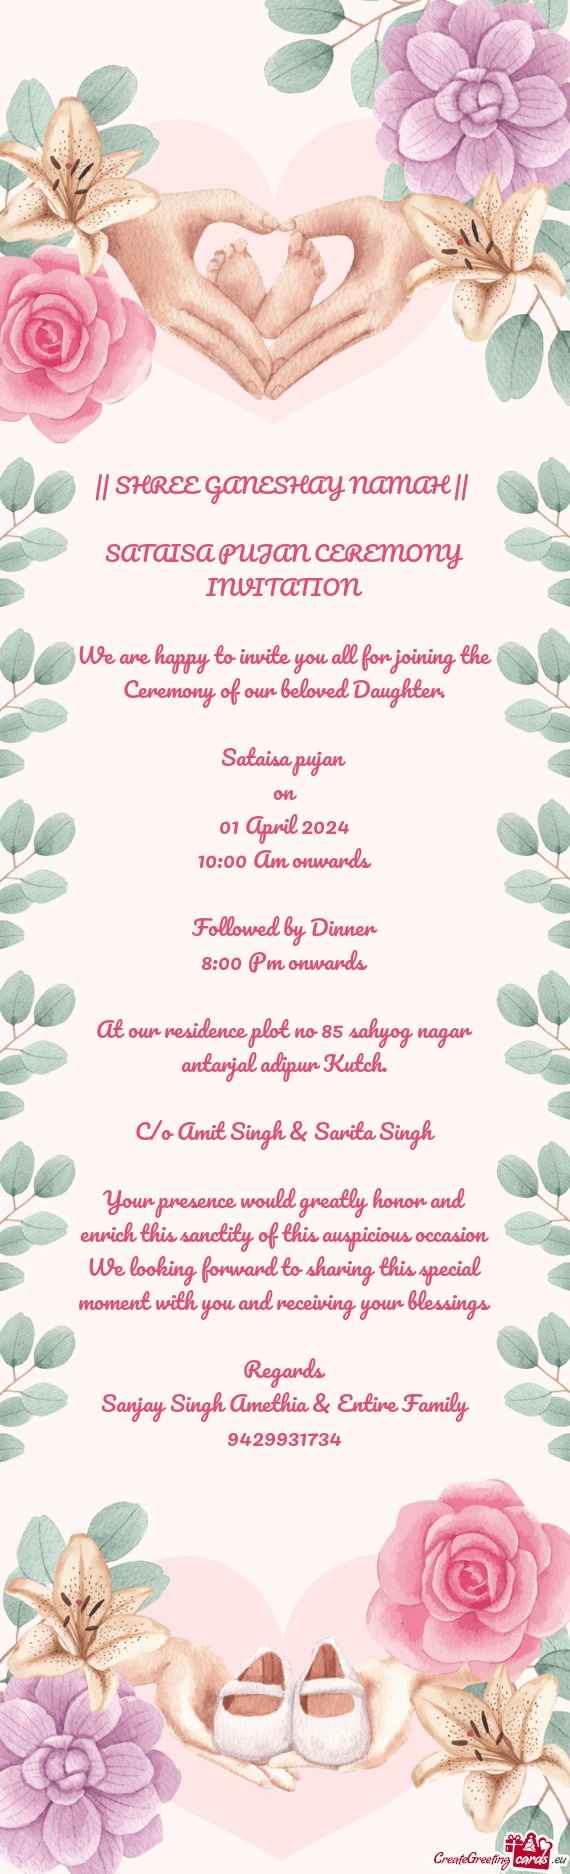 We are happy to invite you all for joining the Ceremony of our beloved Daughter